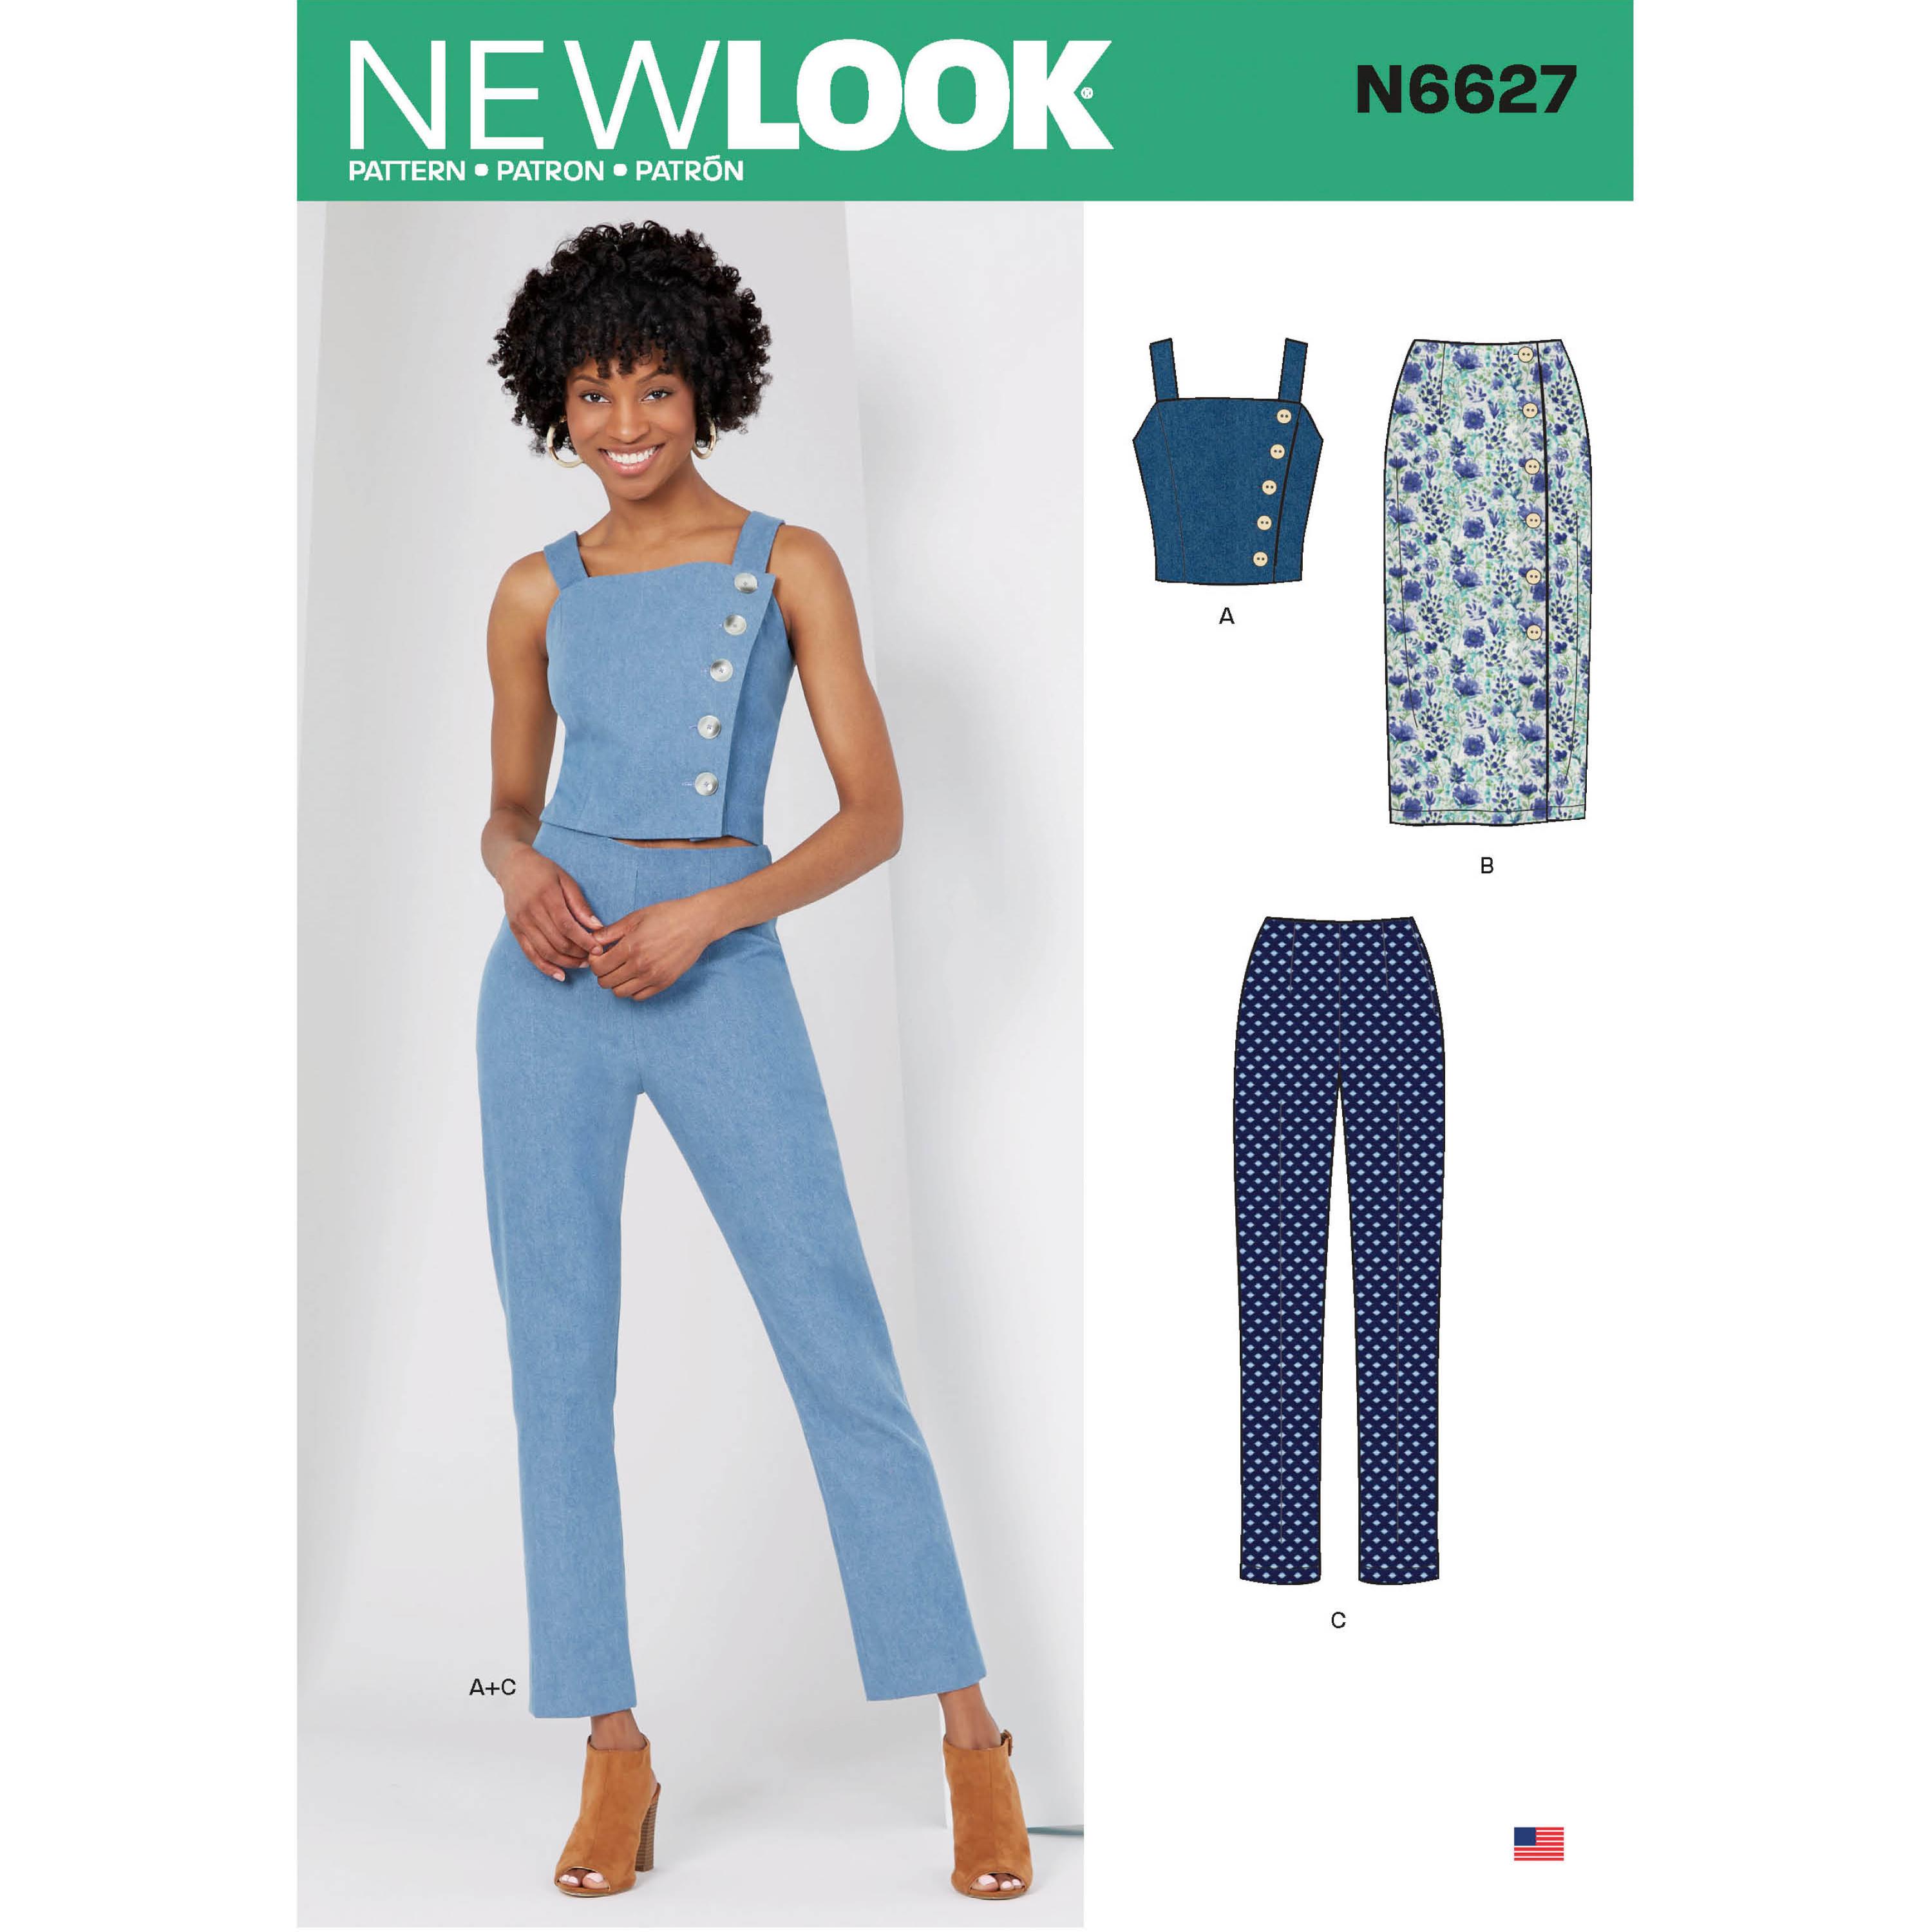 NewLook Sewing Pattern N6627 Misses' Top, Skirt, And Pants